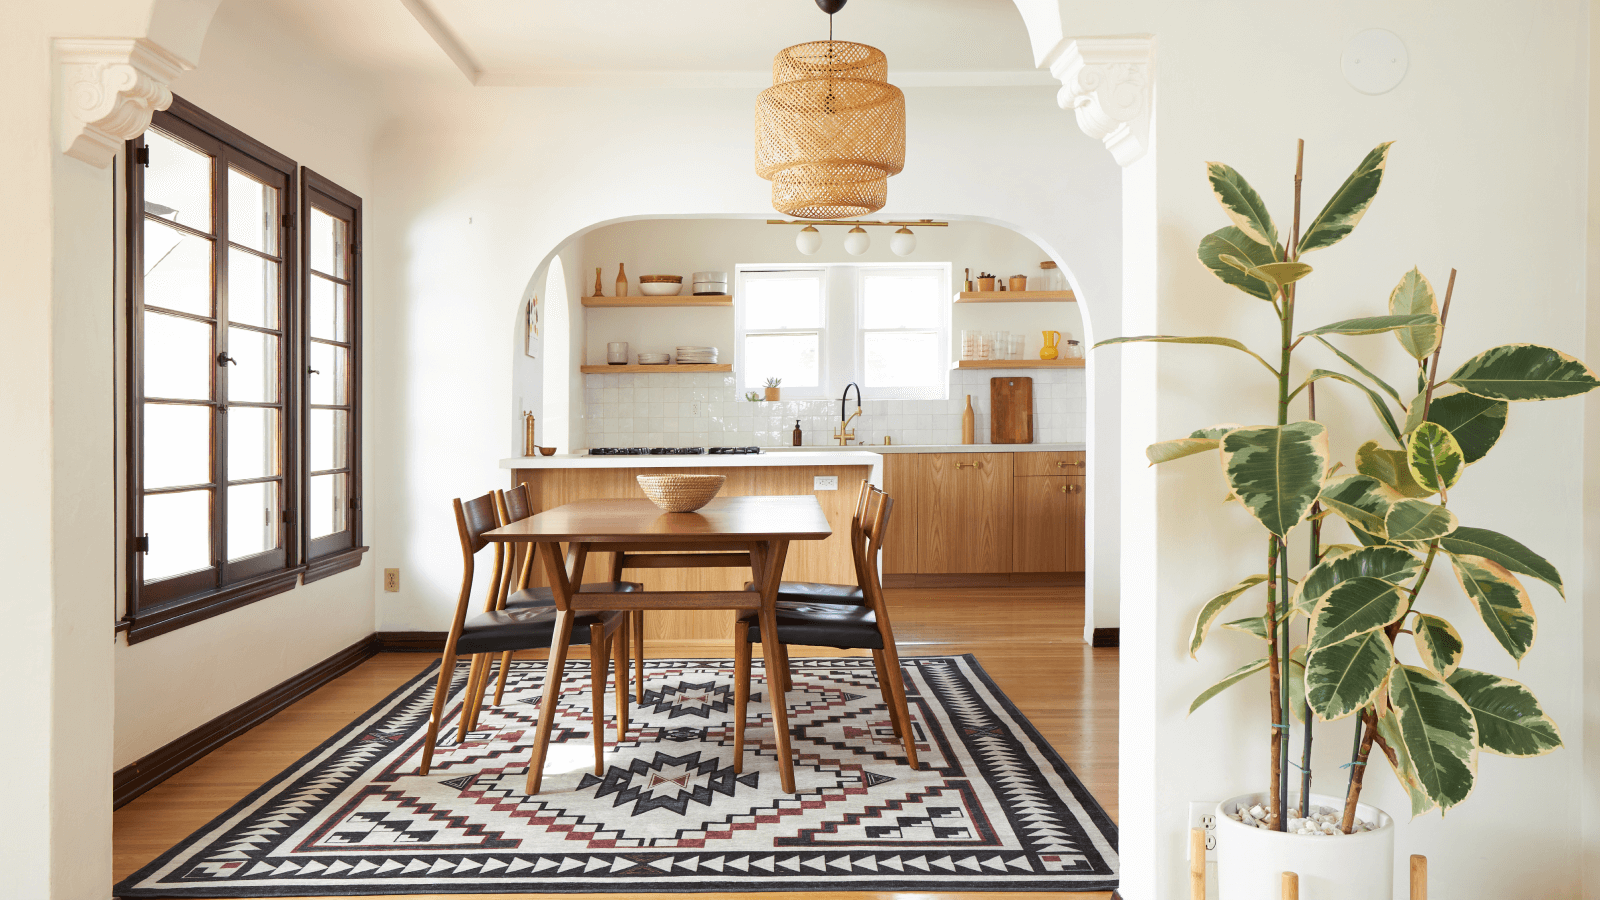 Rug Size Guide : How To Choose The Right Rug Size – JINCHAN Rugs